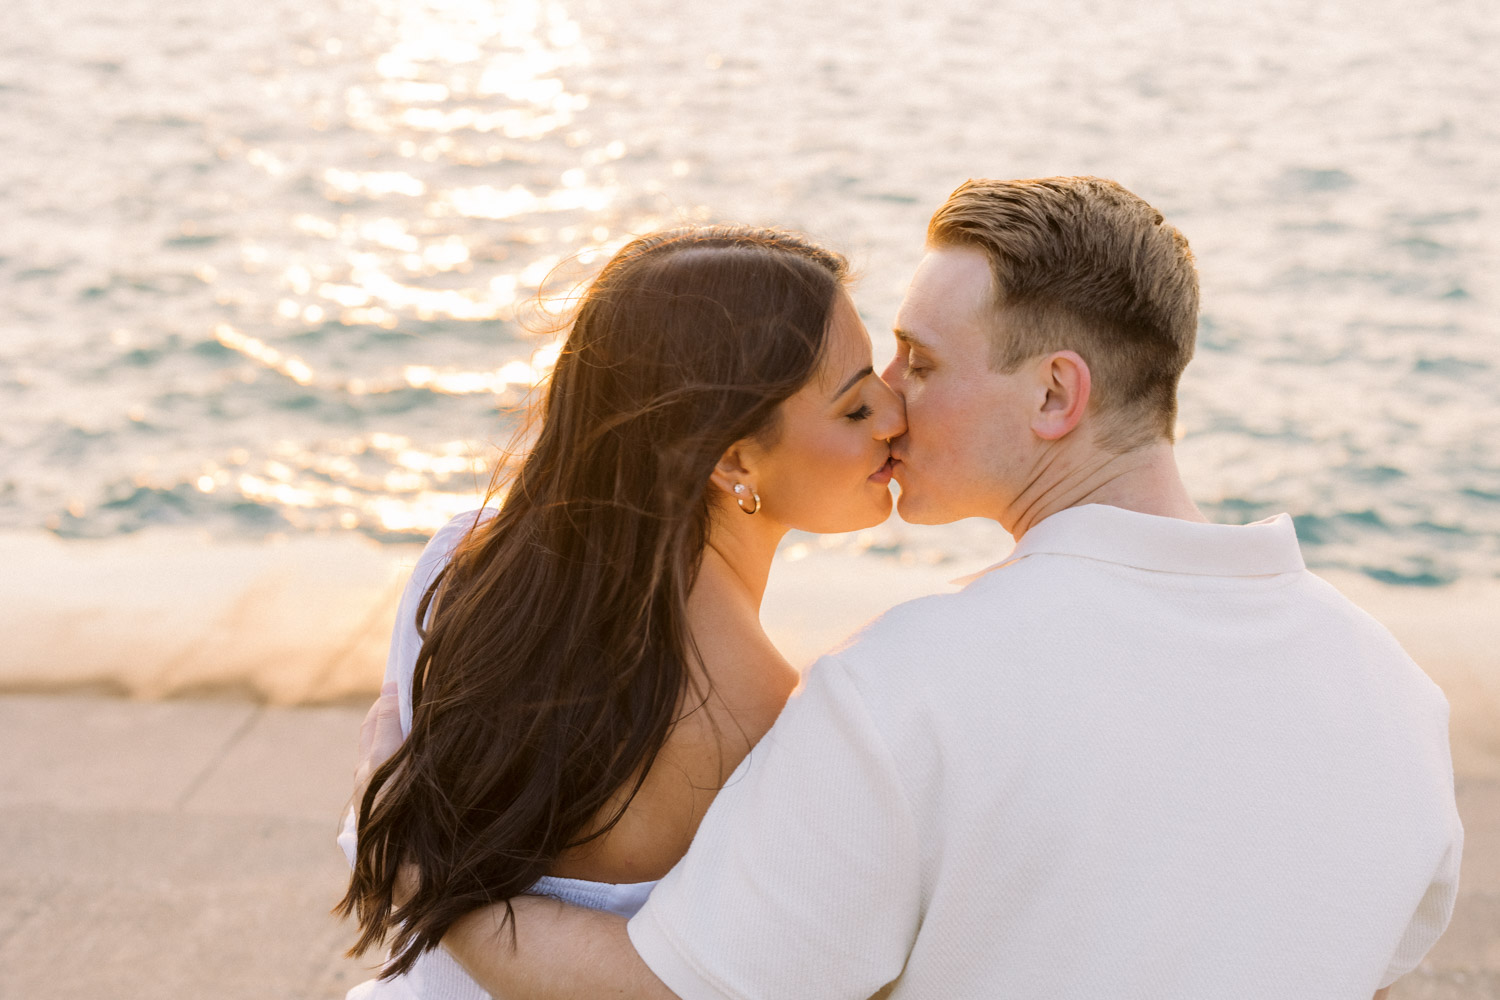 A sunset engagement photo taken along the lakefront with the Chicago skyline